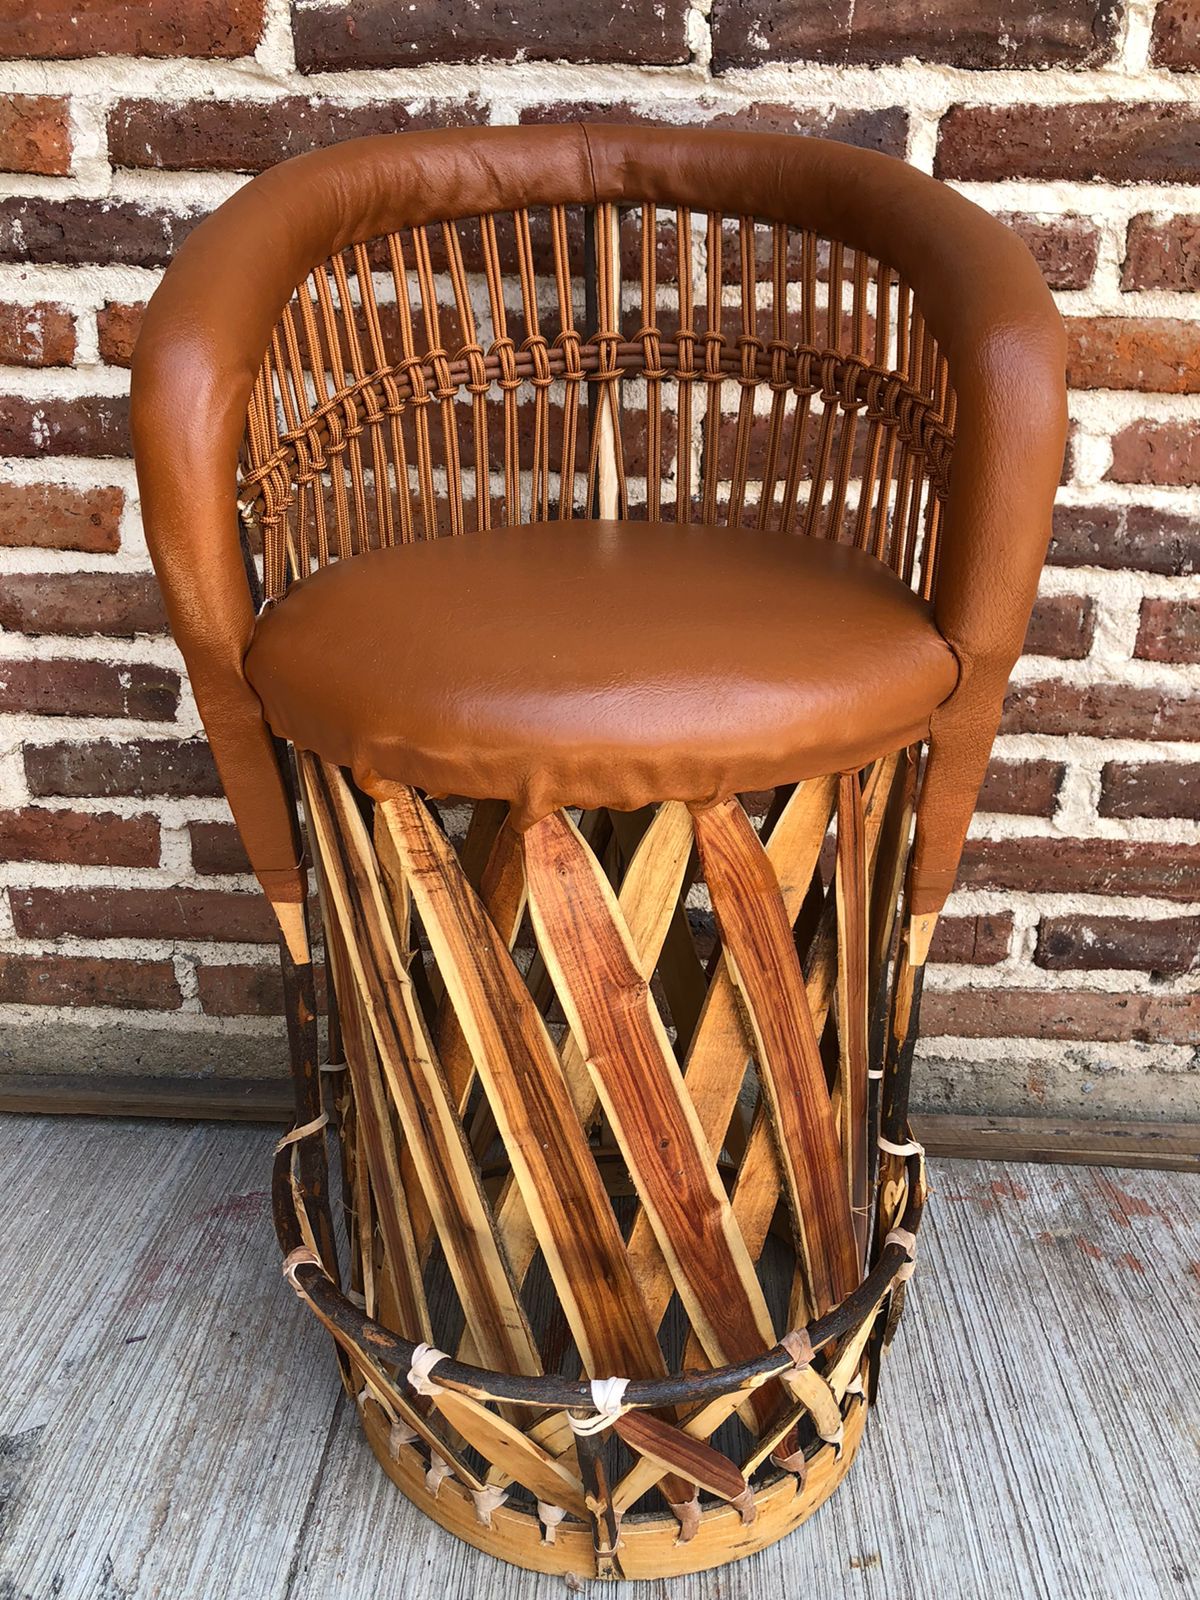 Mexican Handmade Cushioned Equipal Acapulco Barstool Chair-  Traditional MeXican Artisan Fashion & Design